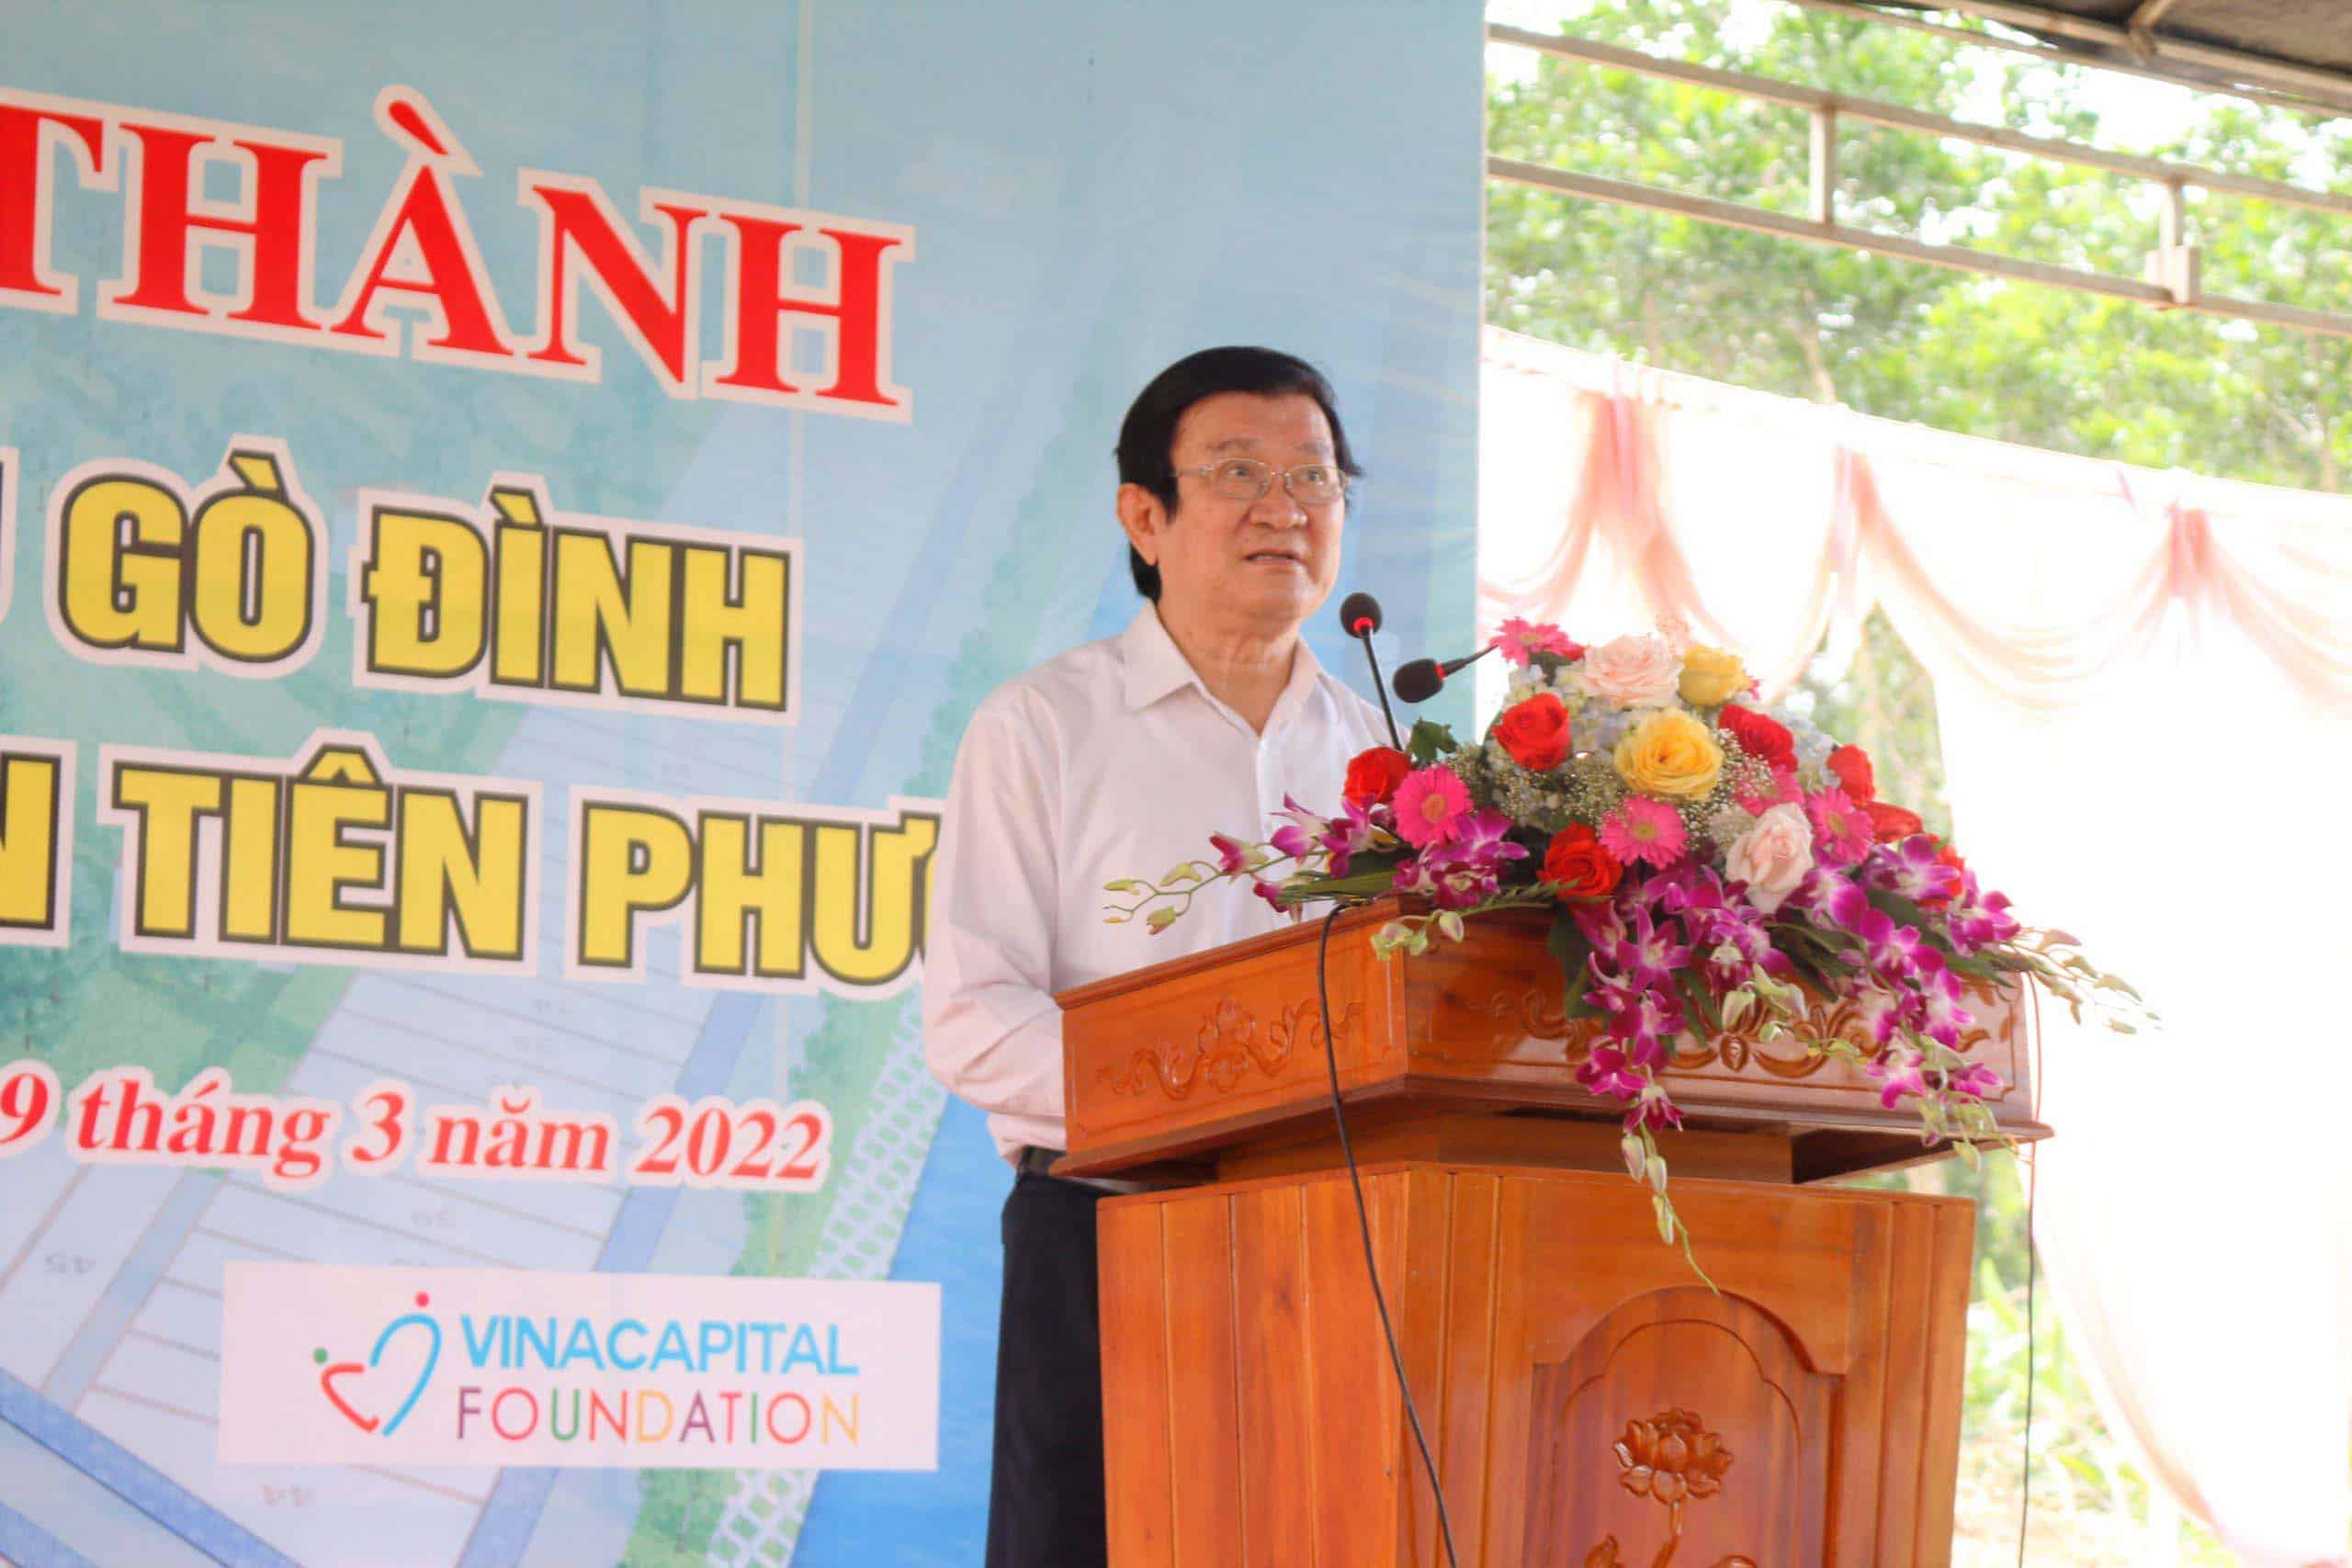 VinaCapital Foundation inaugurates the Go Dinh Bridge in Tien Phuoc District, Quang Nam Province with the presence of Mr. Truong Tan Sang - Former President of Vietnam